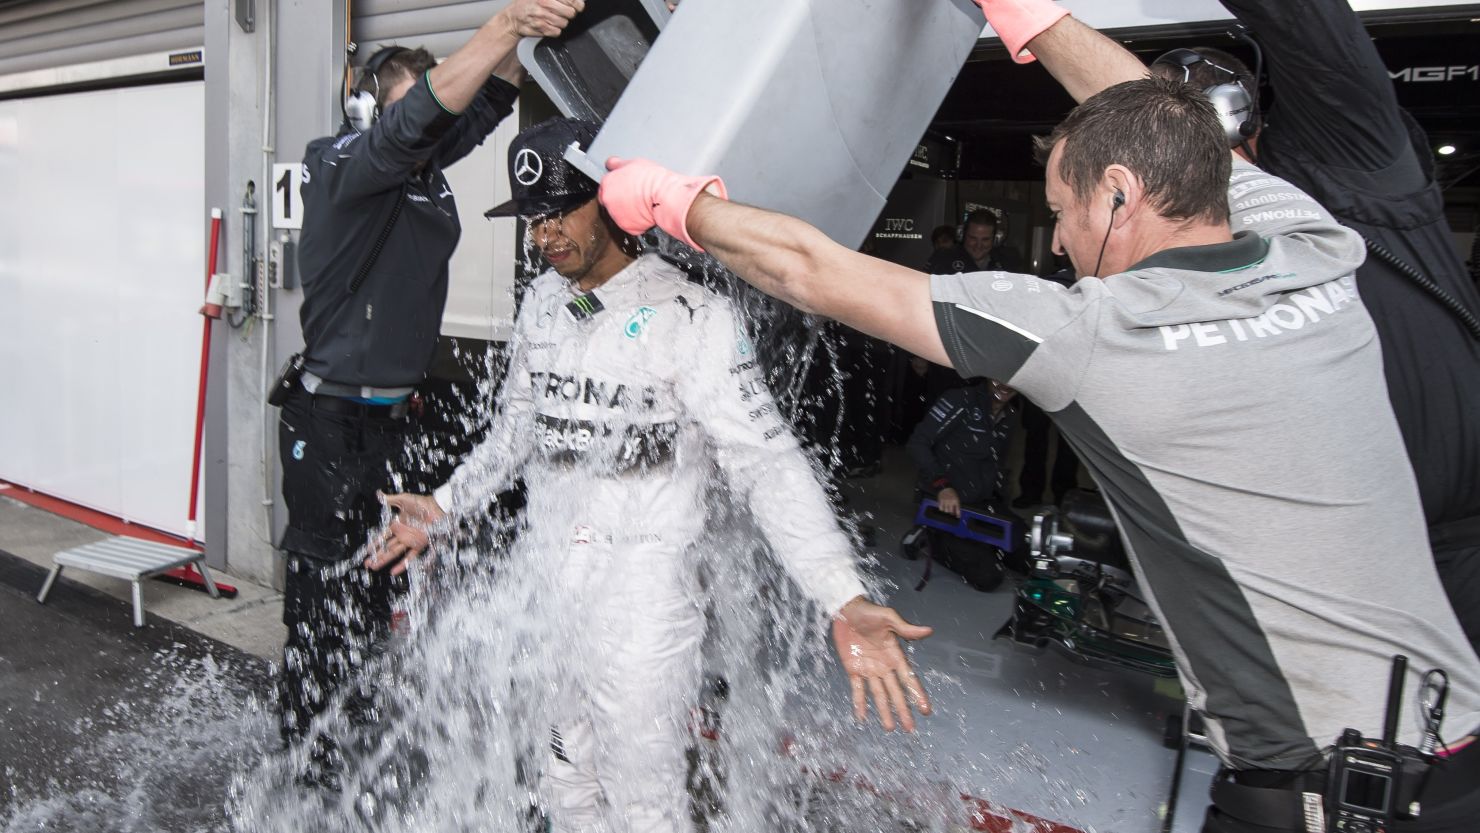 Lewis Hamilton took the ALS bucket challenge before stealing the show at Friday's practice ahead of the Belgian Grand Prix.